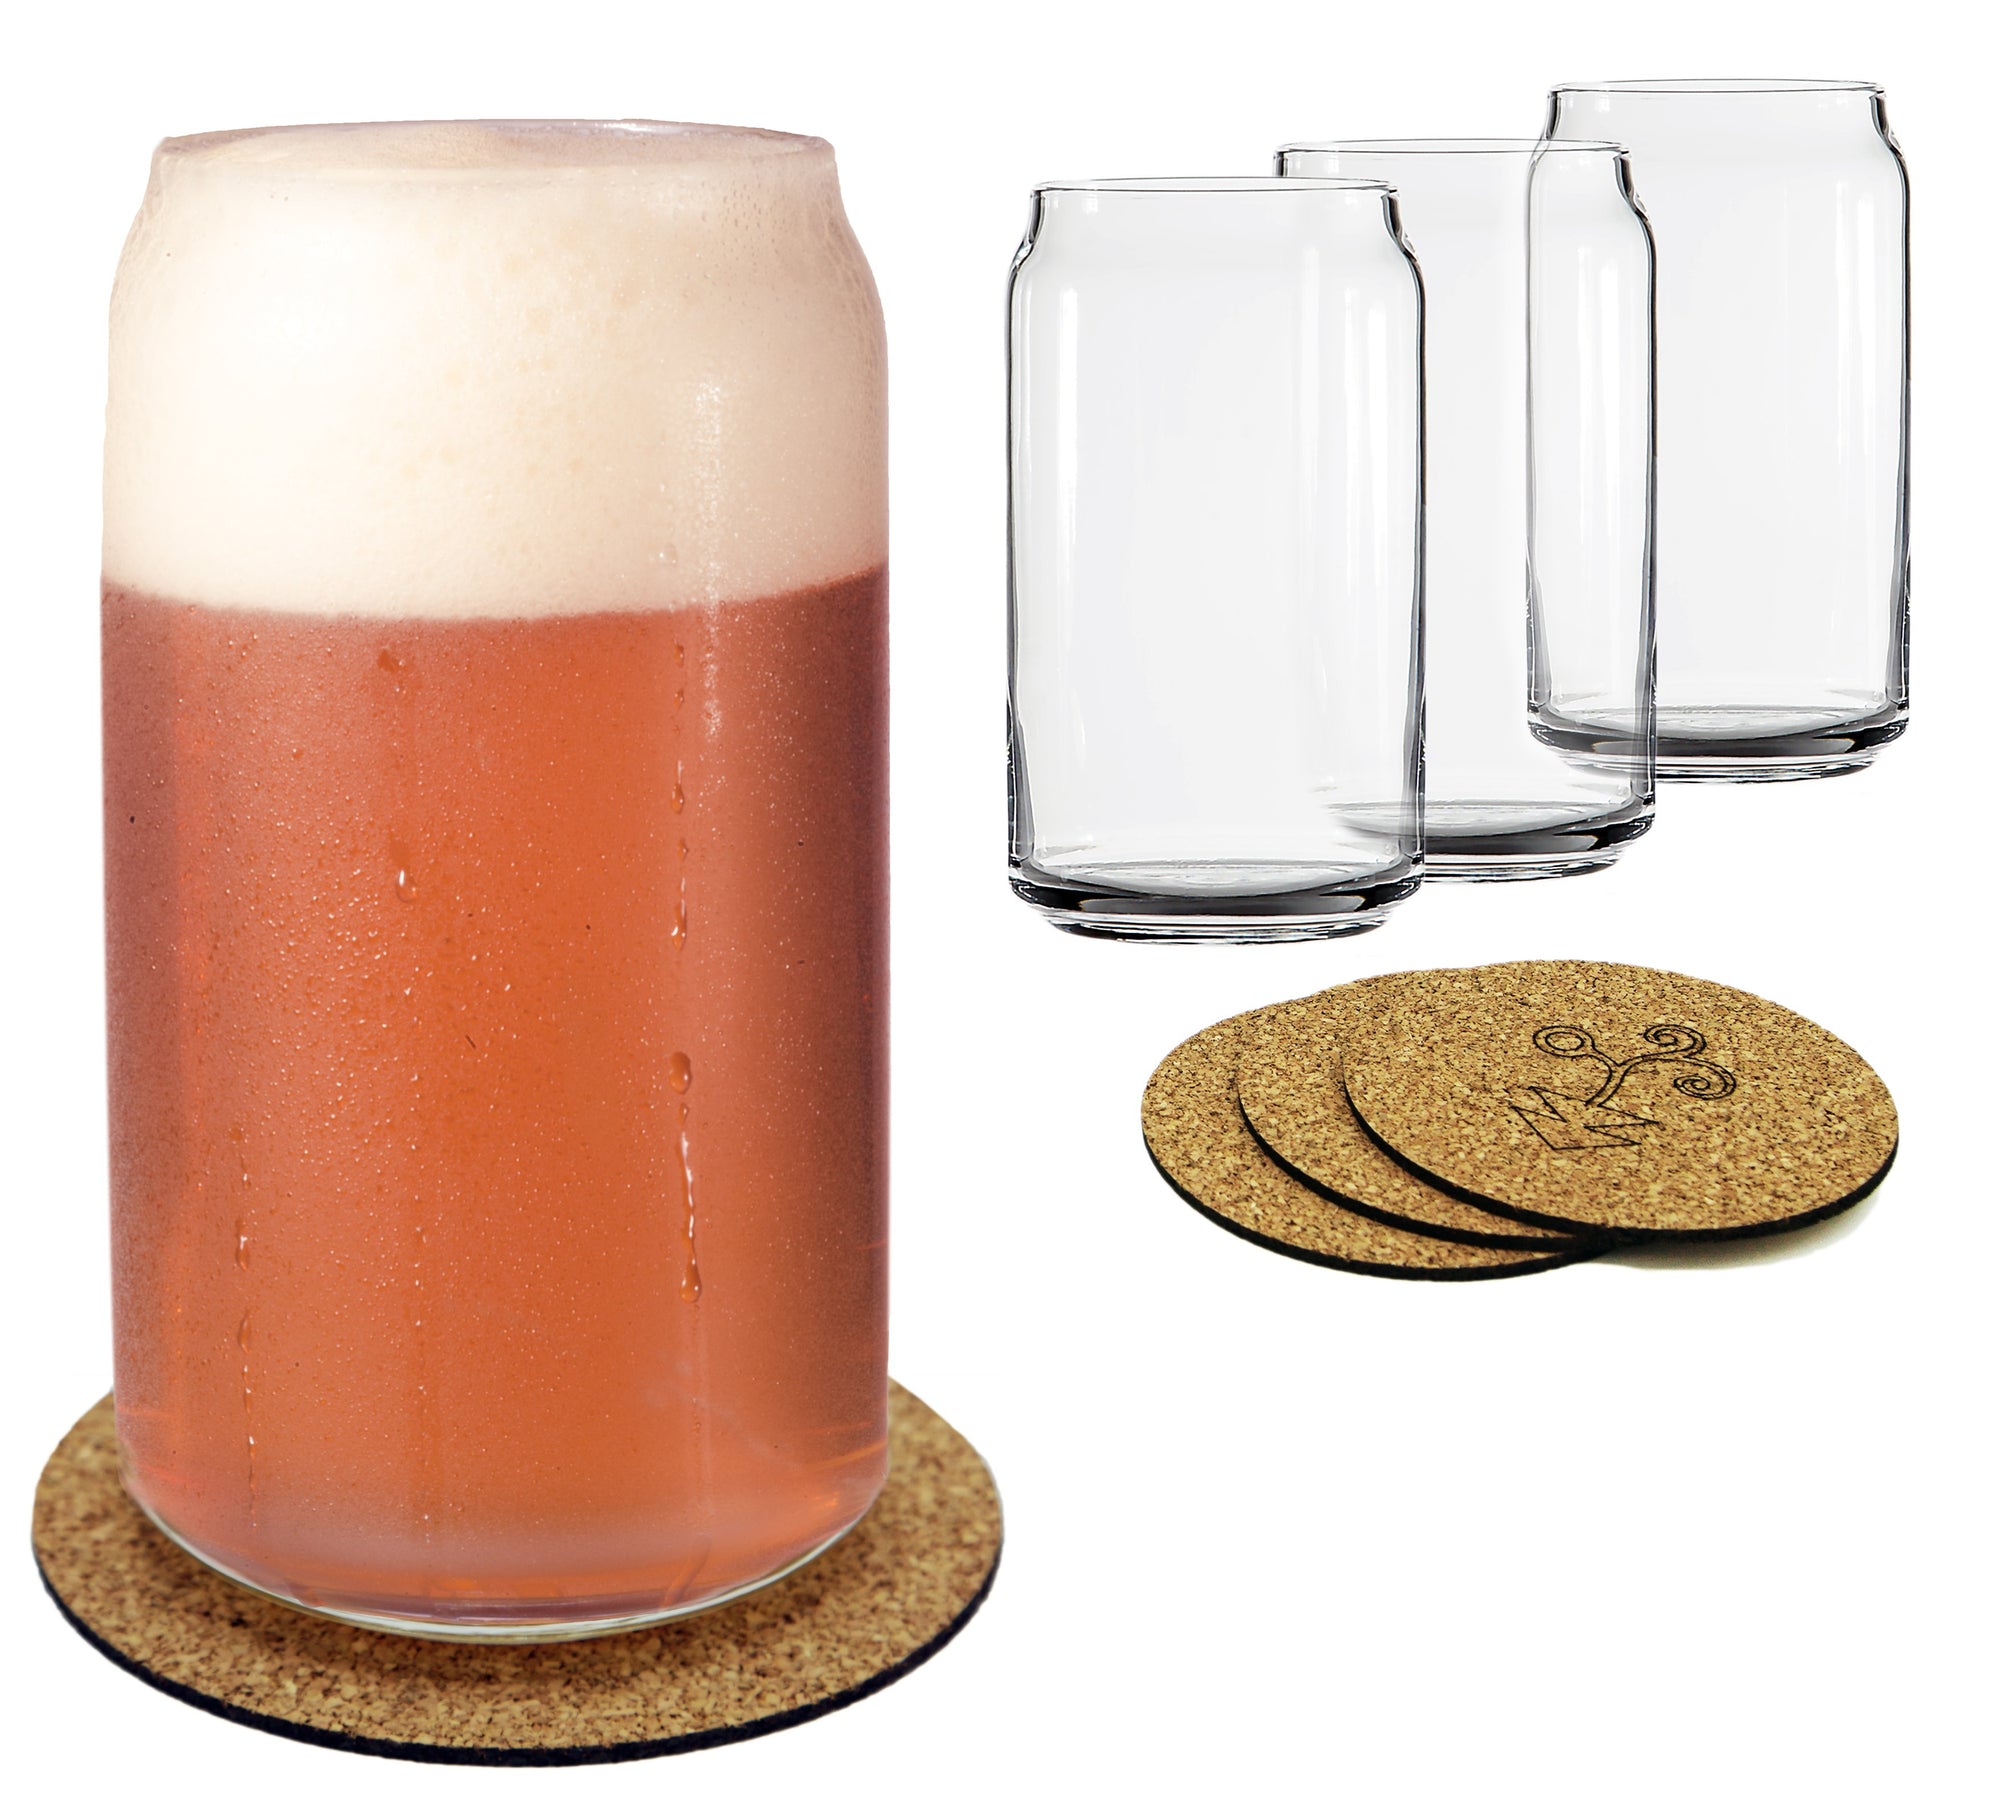 Ecodesign Drinkware Libbey Beer Glass Can Shaped 16 oz - Pint Beer Glasses 4 Pack w/ Coasters